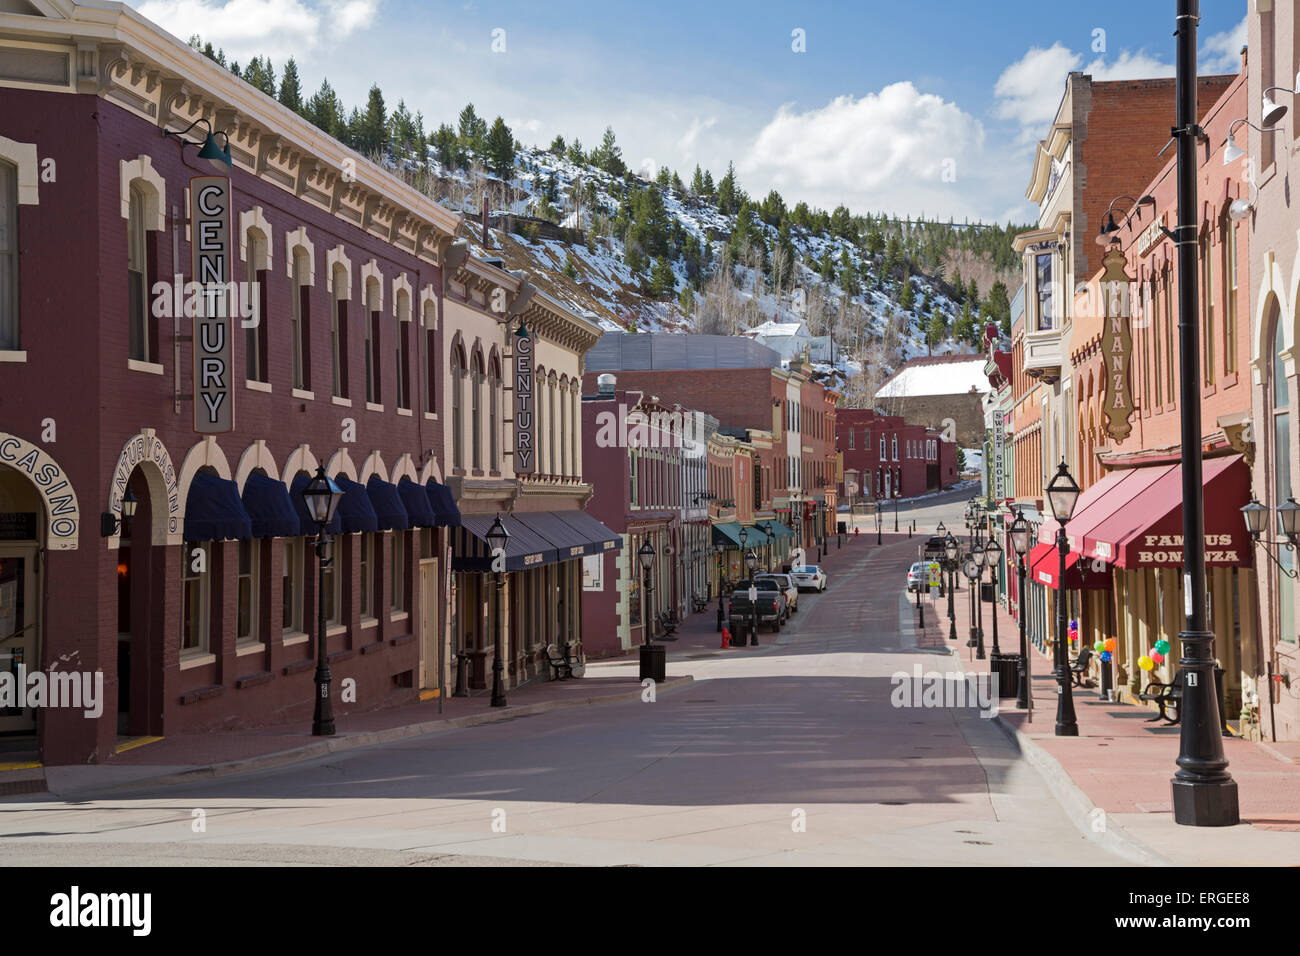 Central City, Colorado - A street in the historic district of Central City, located in the mountains west of Denver. Stock Photo